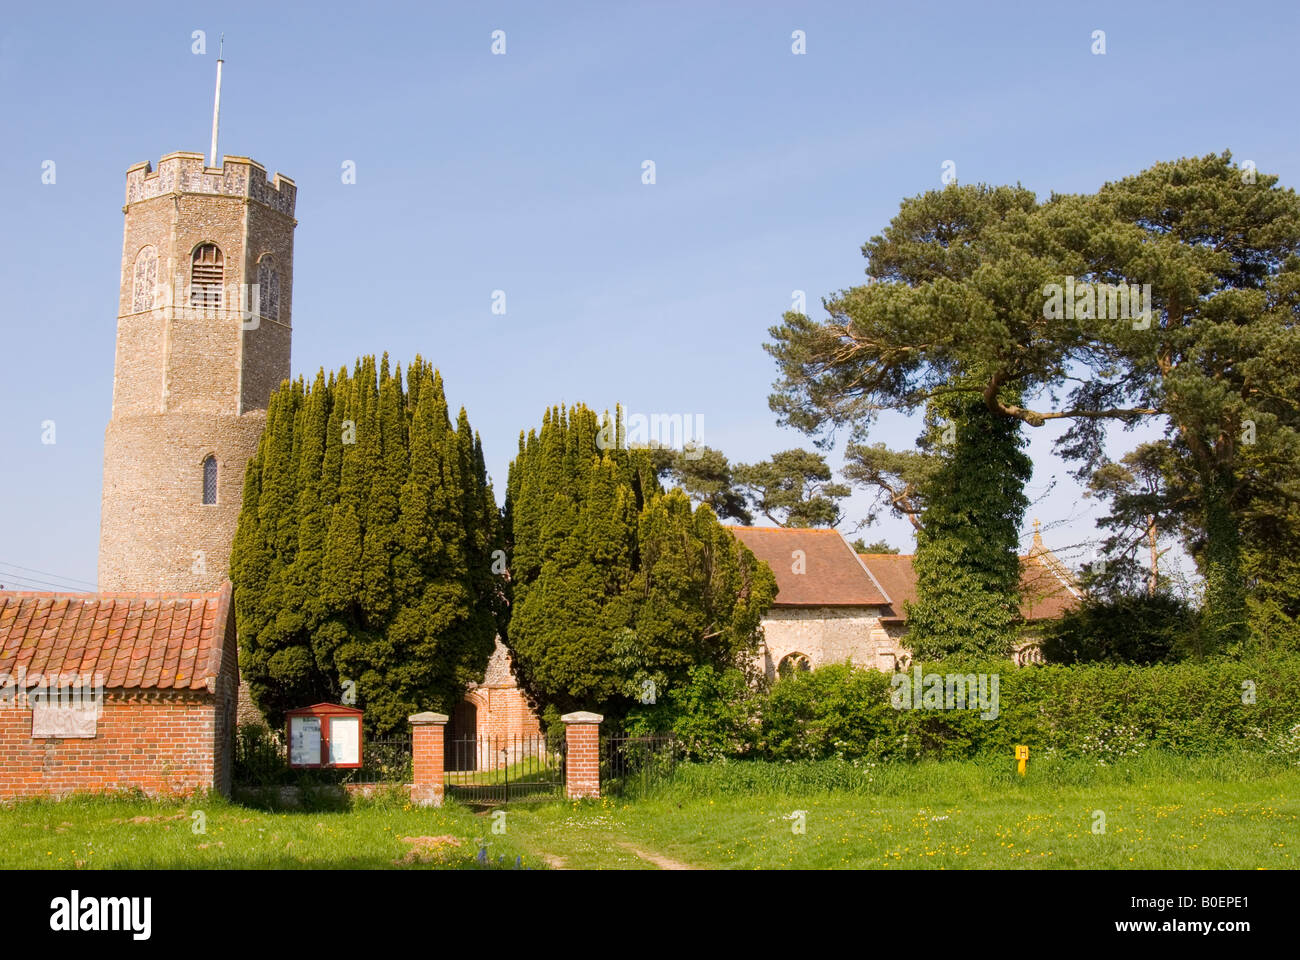 The Church Of Saint Peter At Ilketshall St.Andrew,Suffolk,Uk Stock Photo